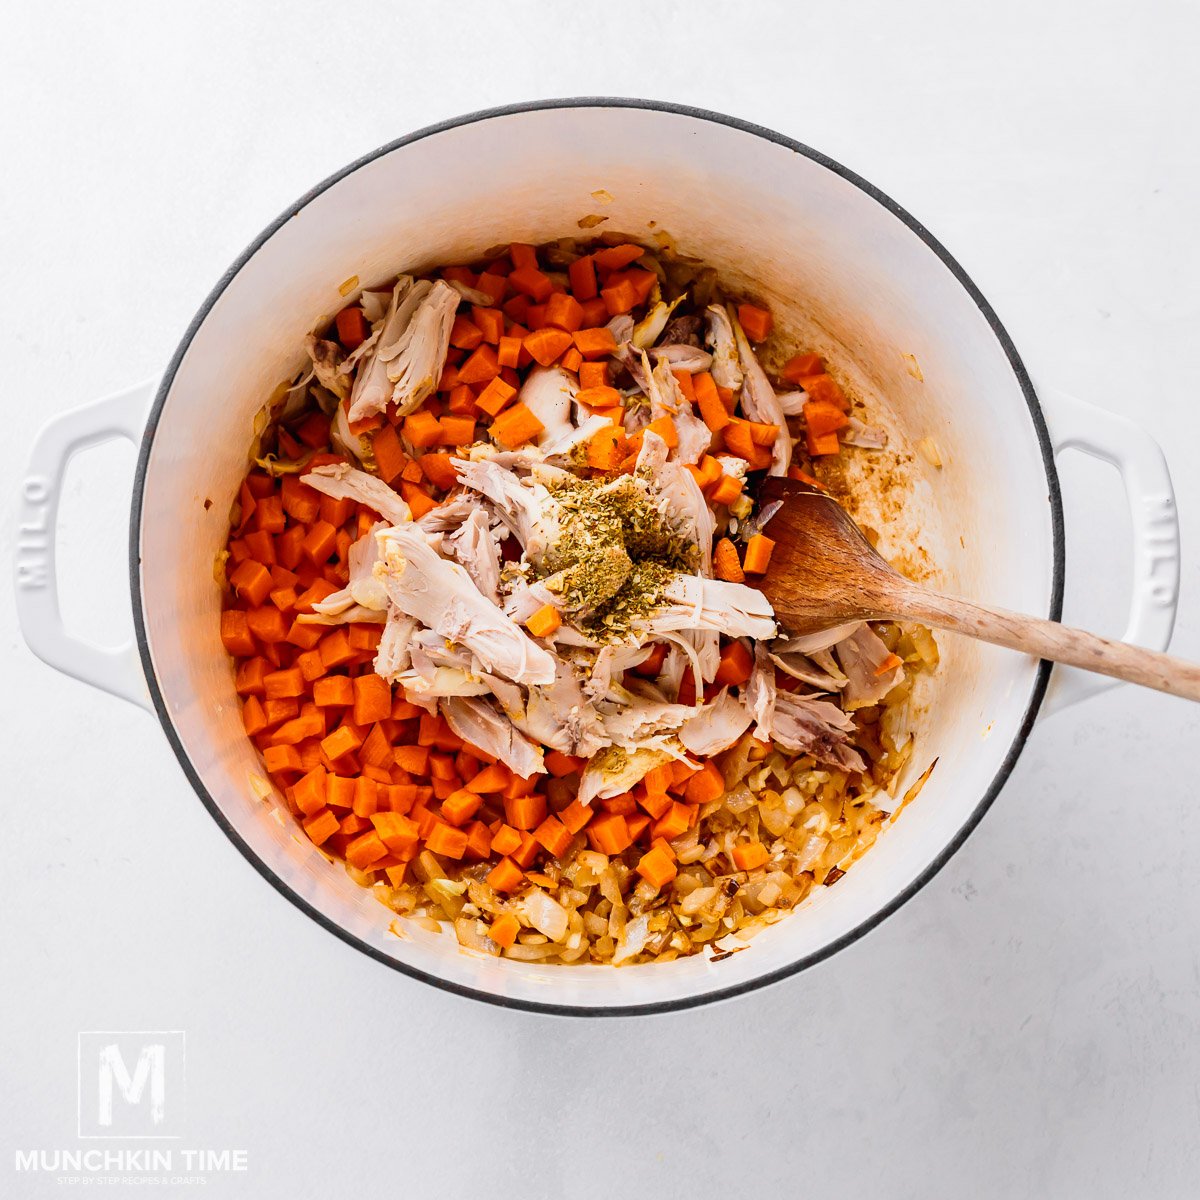 Shredded Chicken and carrots with spices added to the chicken noodle soup.